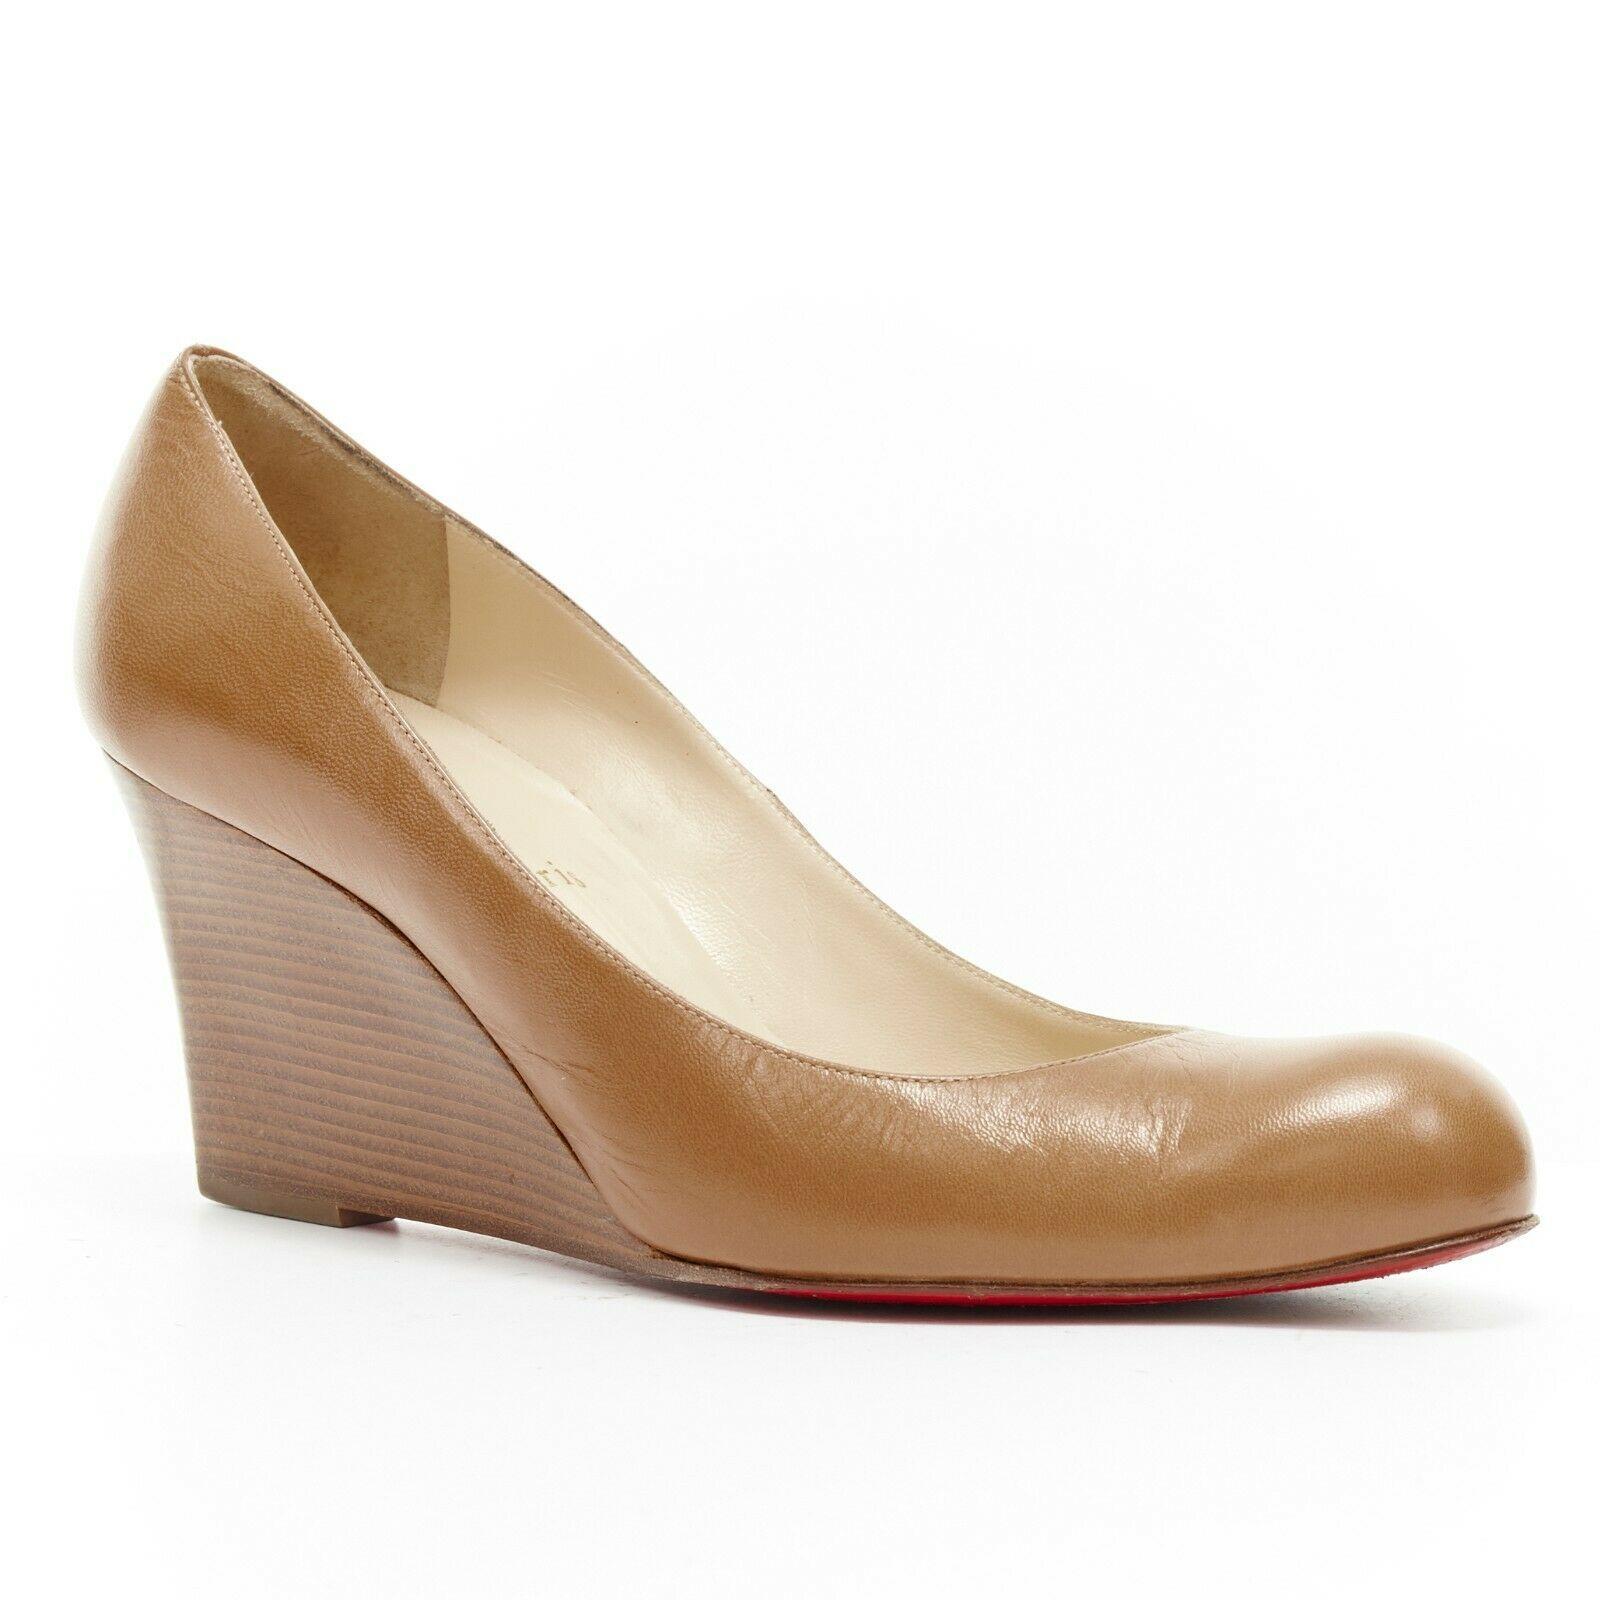 CHRISTIAN LOUBOUTIN Miss Boxe brown leather round toe stacked wooden wedge EU40
CHRISTIAN LOUBOUTIN
Miss Boxe 70. 
Natural brown leather upper. 
Almond round toe. 
Stacked wooden heel. 
Tonal stitching. 
Padded tan leather lining. 
Signature